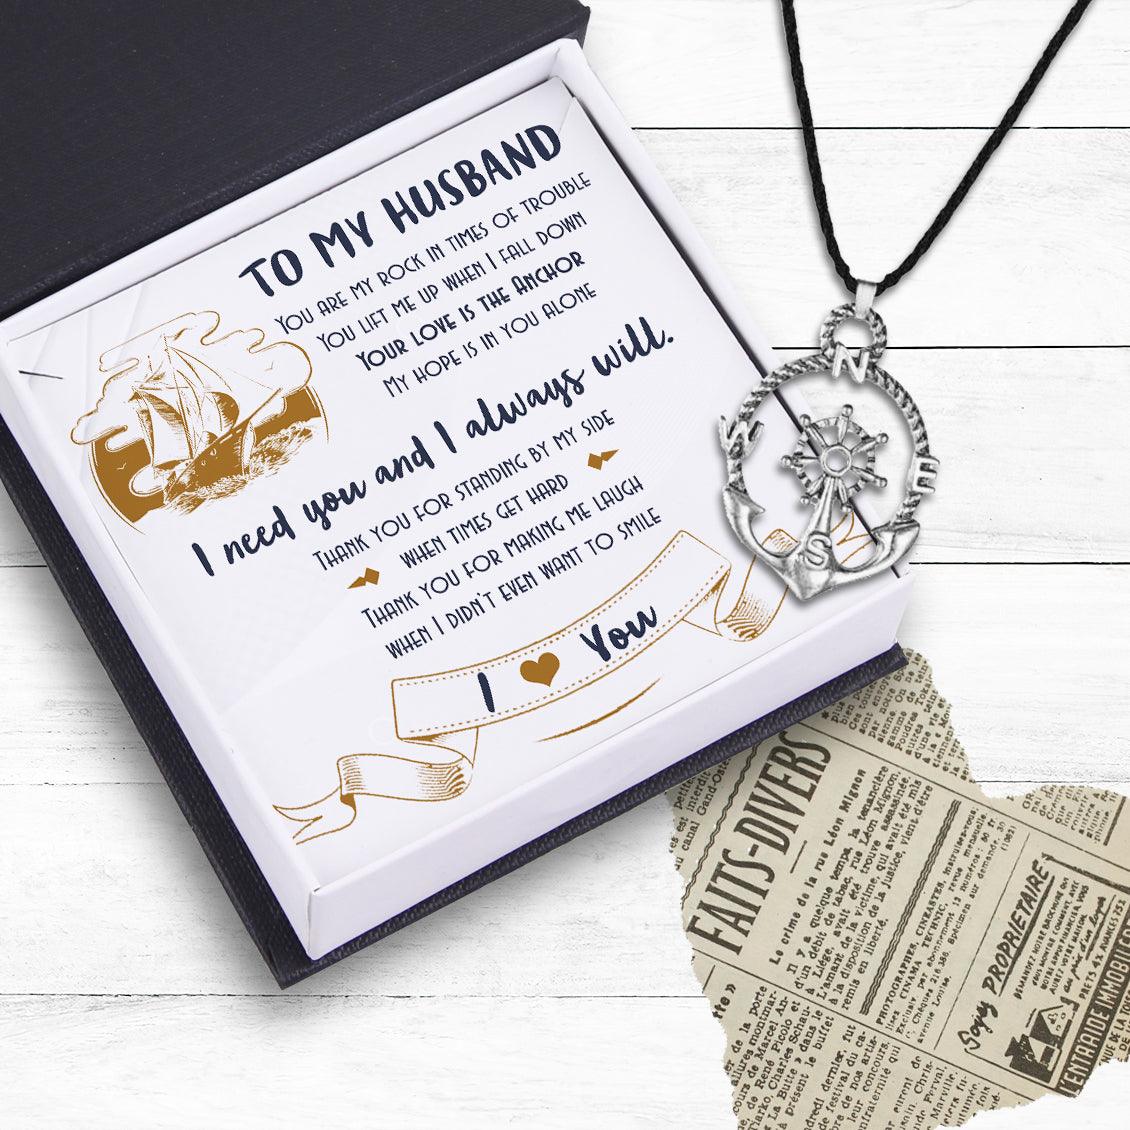 Vintage Anchor Compass Necklace - Skull - To My Husband - I Need You And I Always Will - Augnfx14004 - Gifts Holder